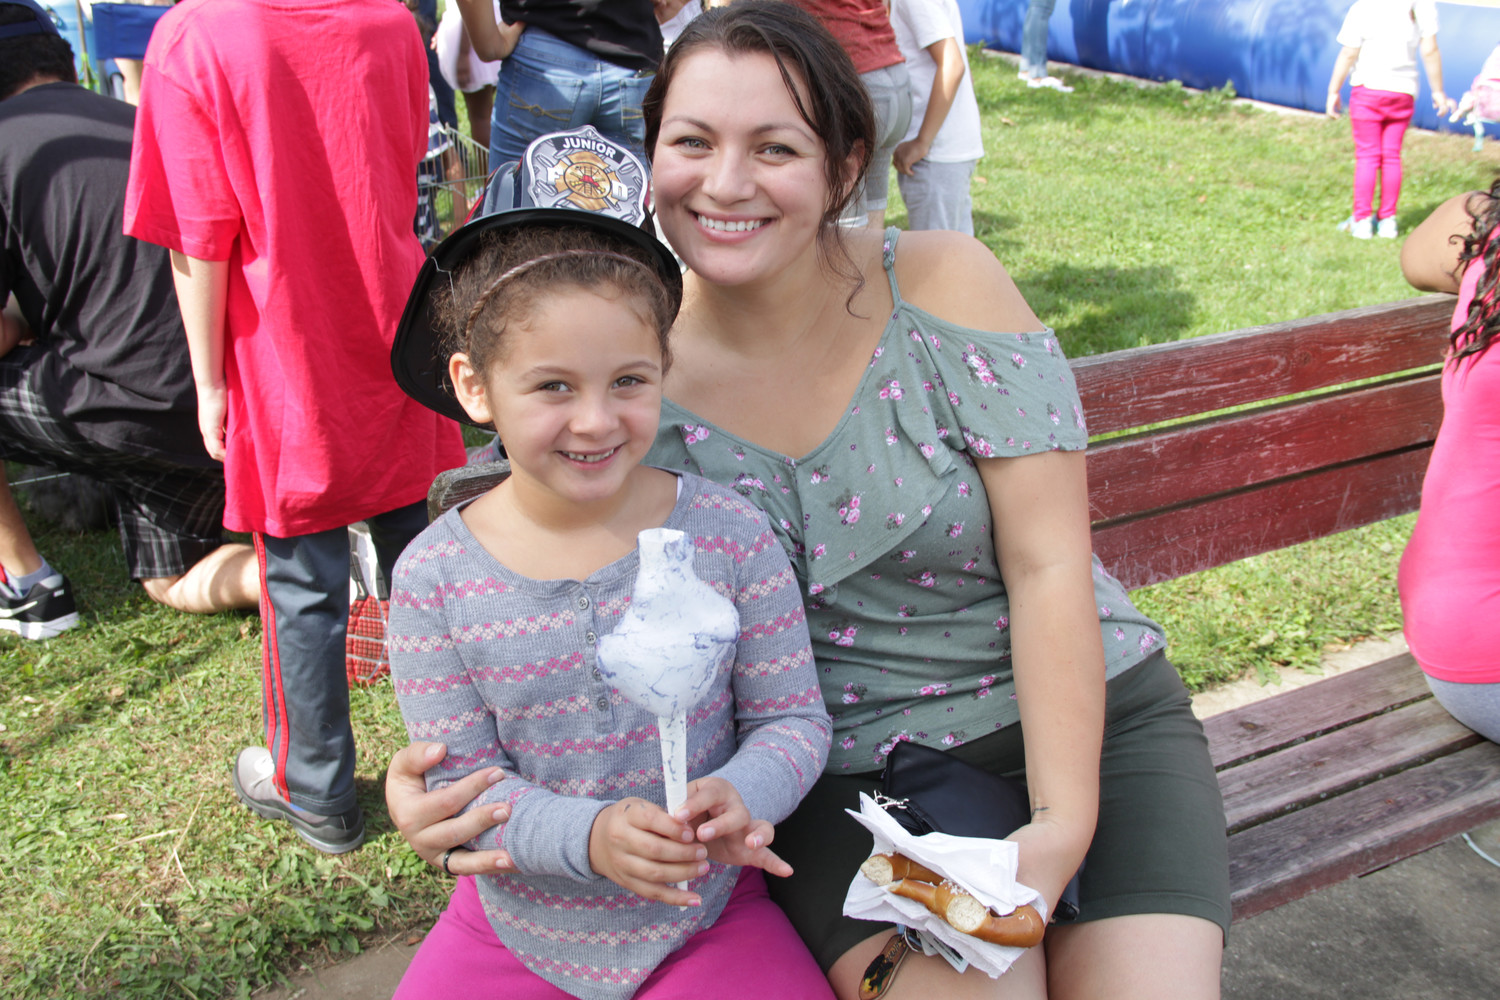 Karissa Lazo, 7, and her mom Yolonda Lazo enjoyed cotton candy and a soft pretzel during the Freeport Memorial Library Fall Festival on Oct. 7.